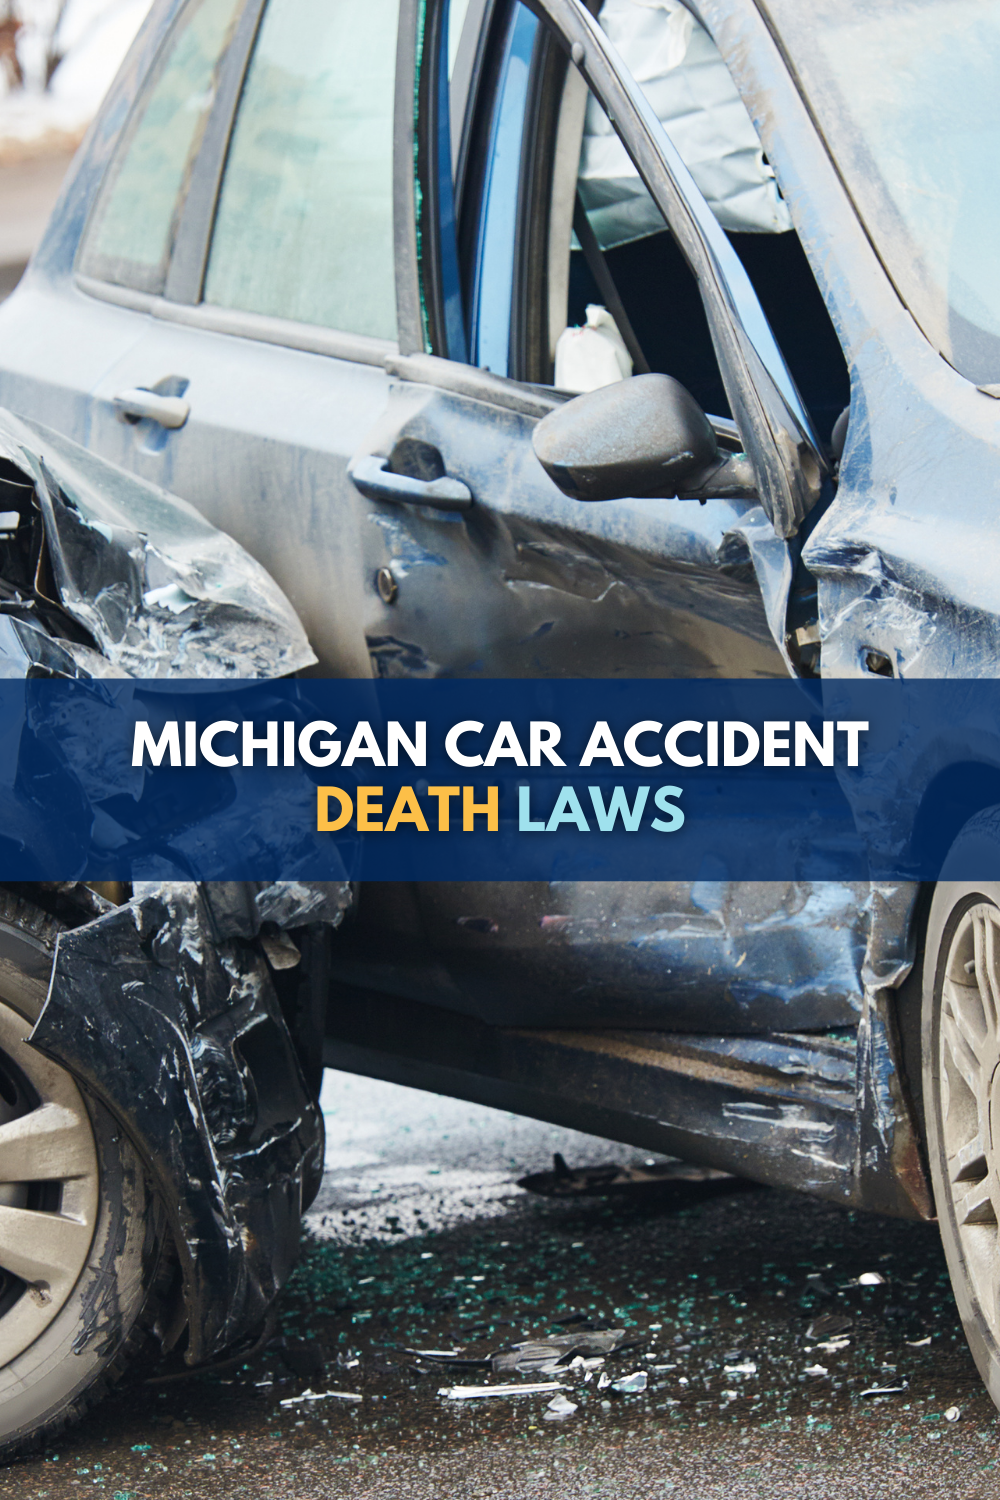 Michigan Car Accident Death Laws: Know Your Legal Rights